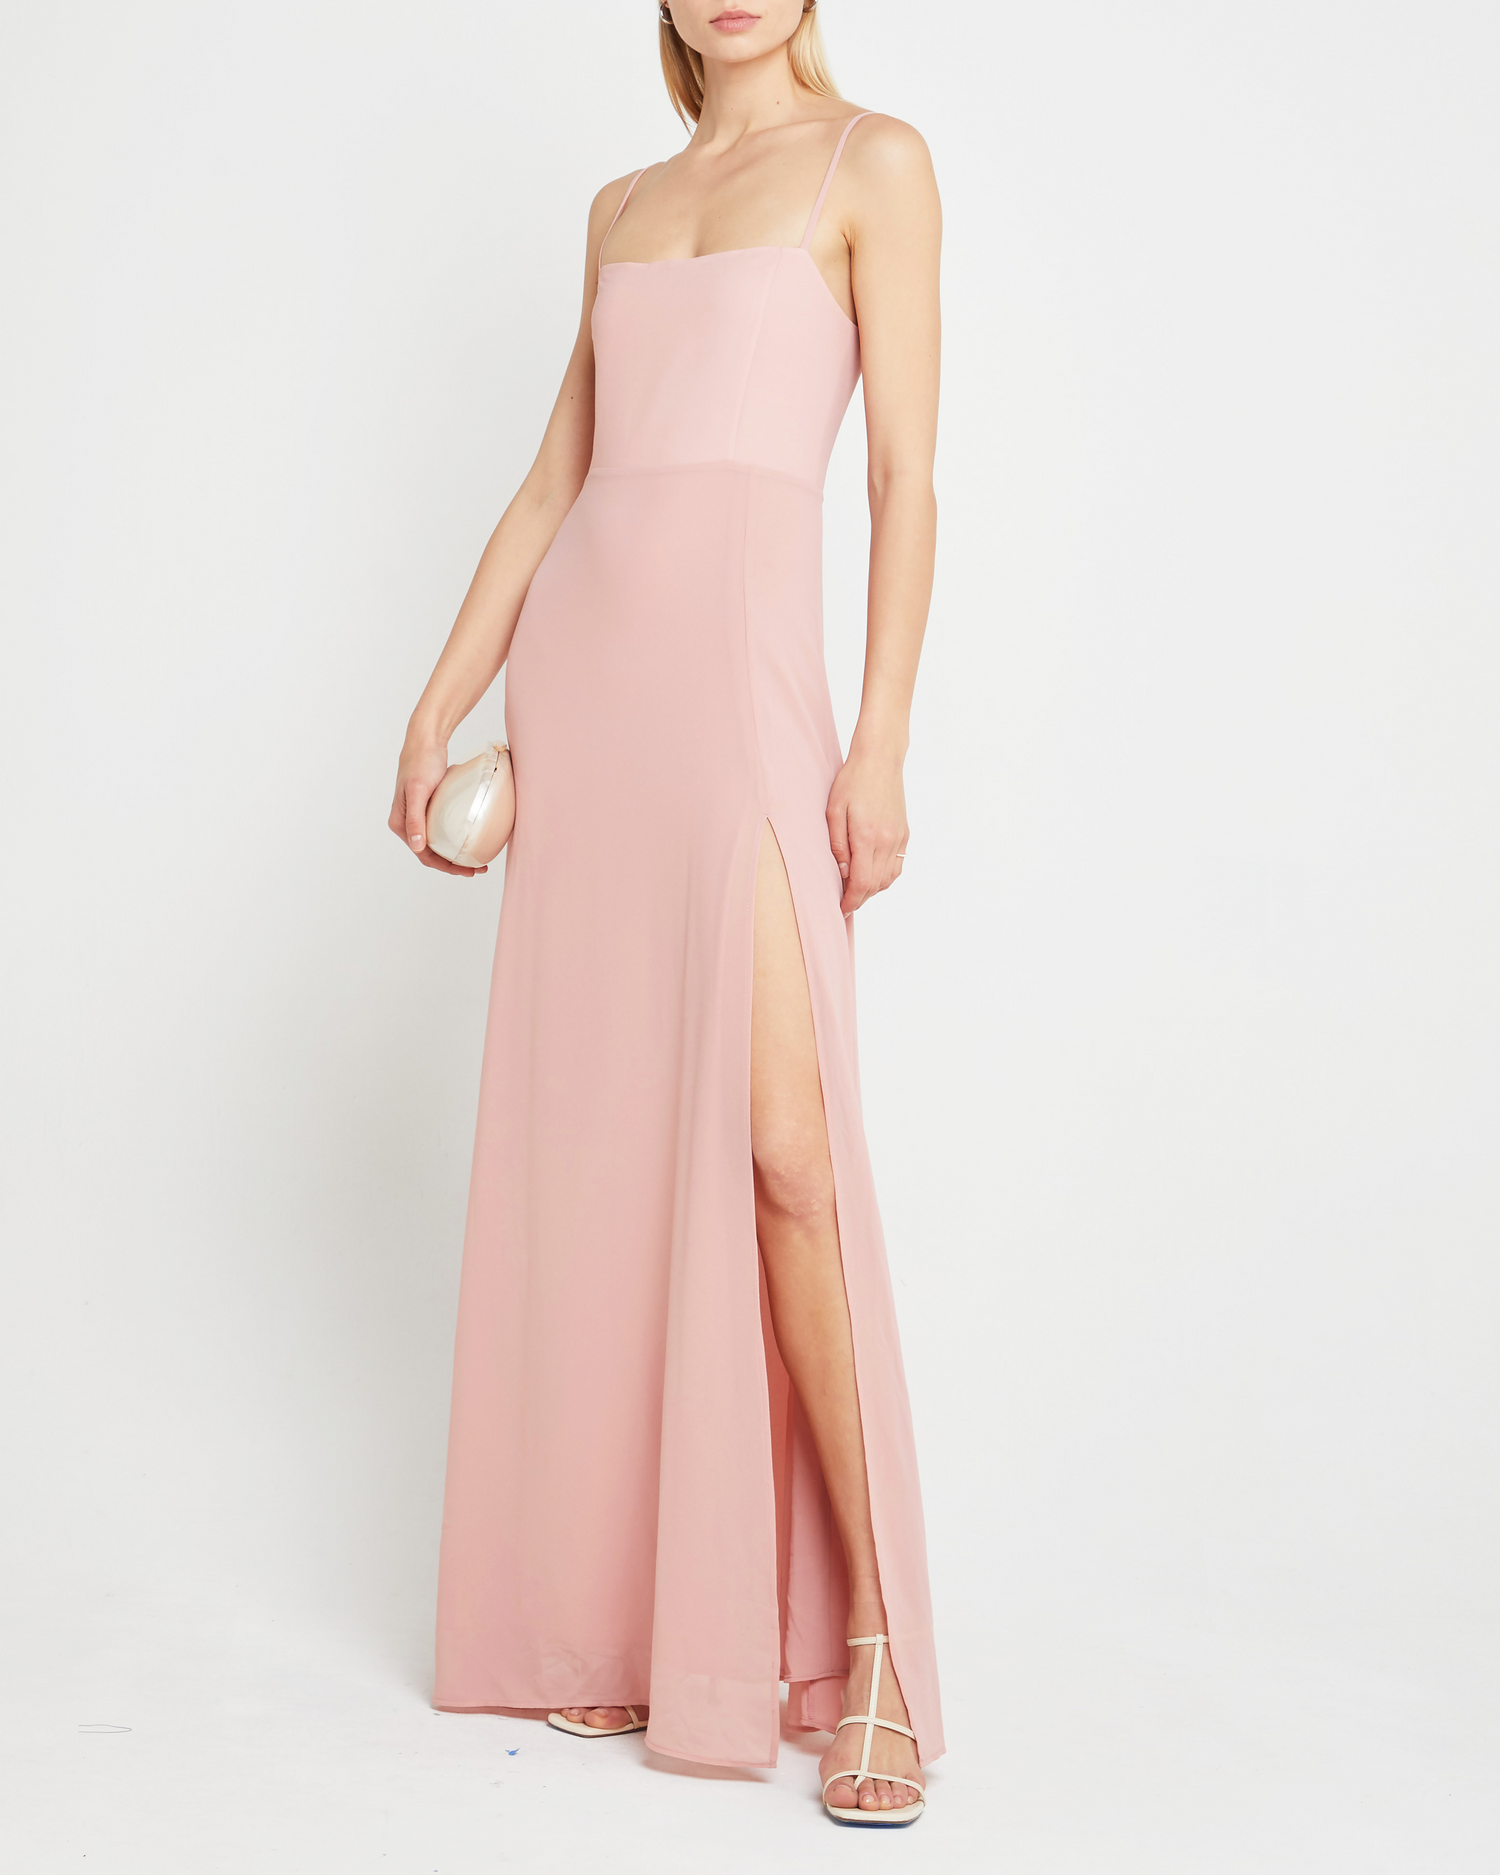 First image of Jessica Maxi Dress, a pink wedding guest dress with back zipper, straight neckline, side slit, adjustable straps, smocked back detail, and lining